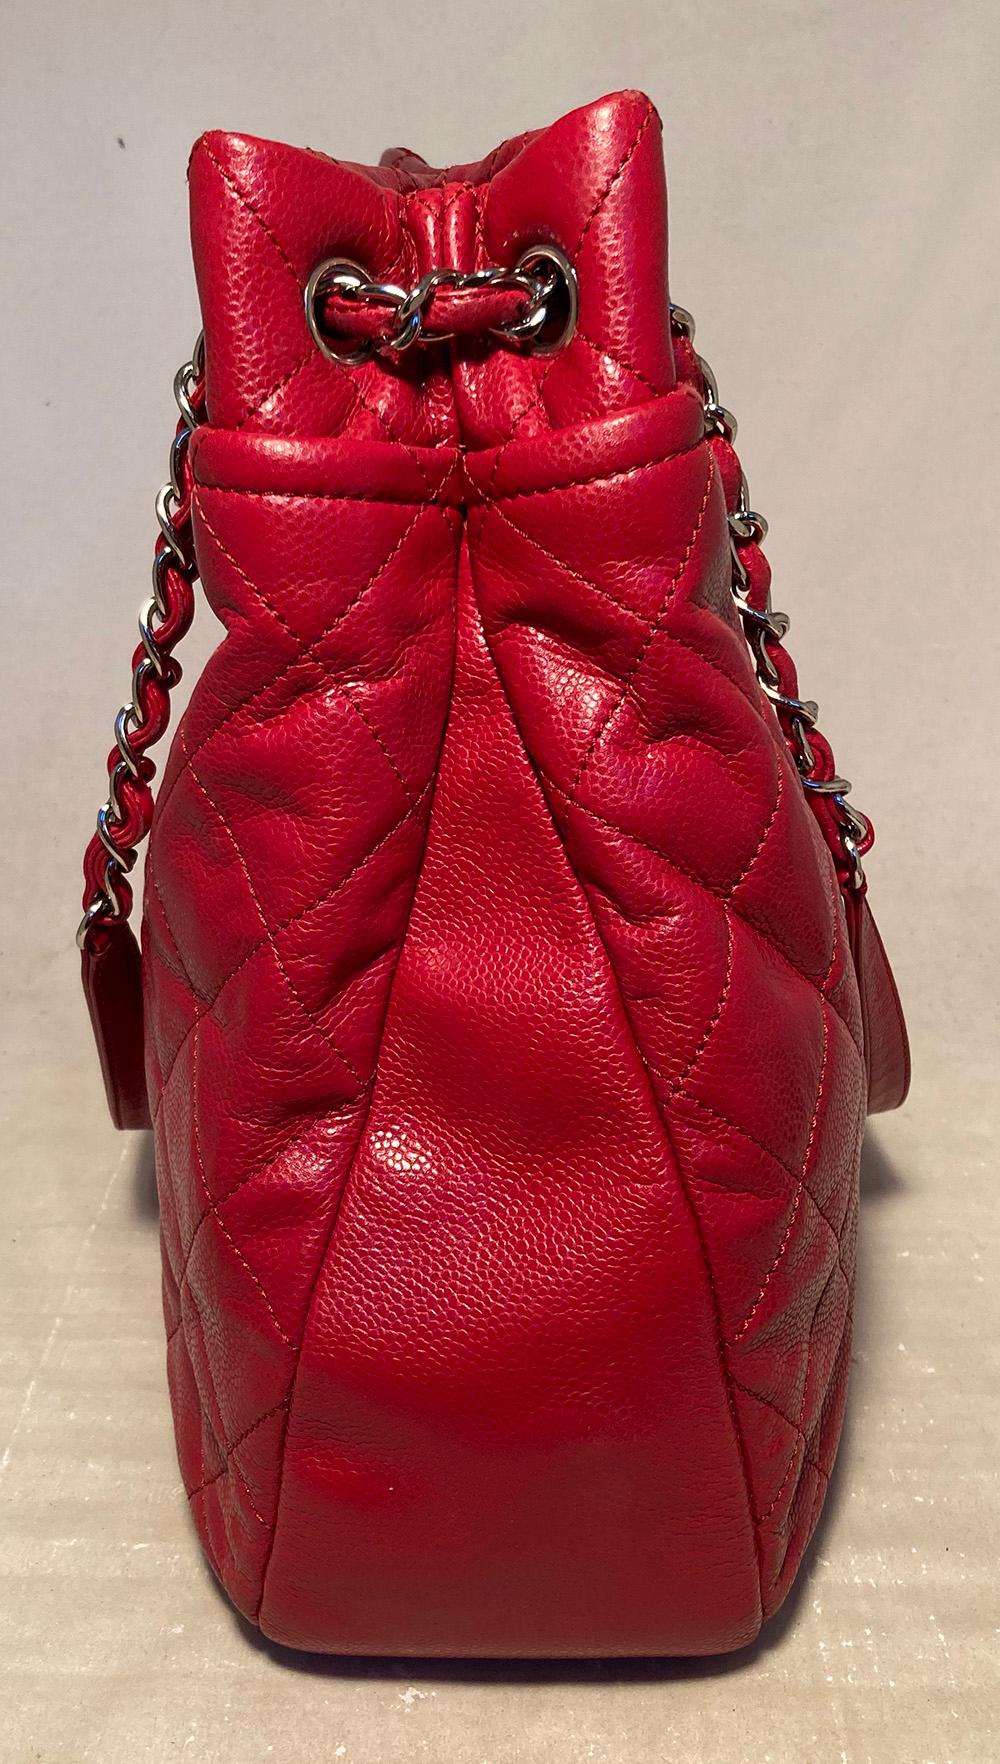 Chanel Red Caviar Soft Shopper. excellent condition. a few small stains on lining otherwise excellent. 15x13x6.5